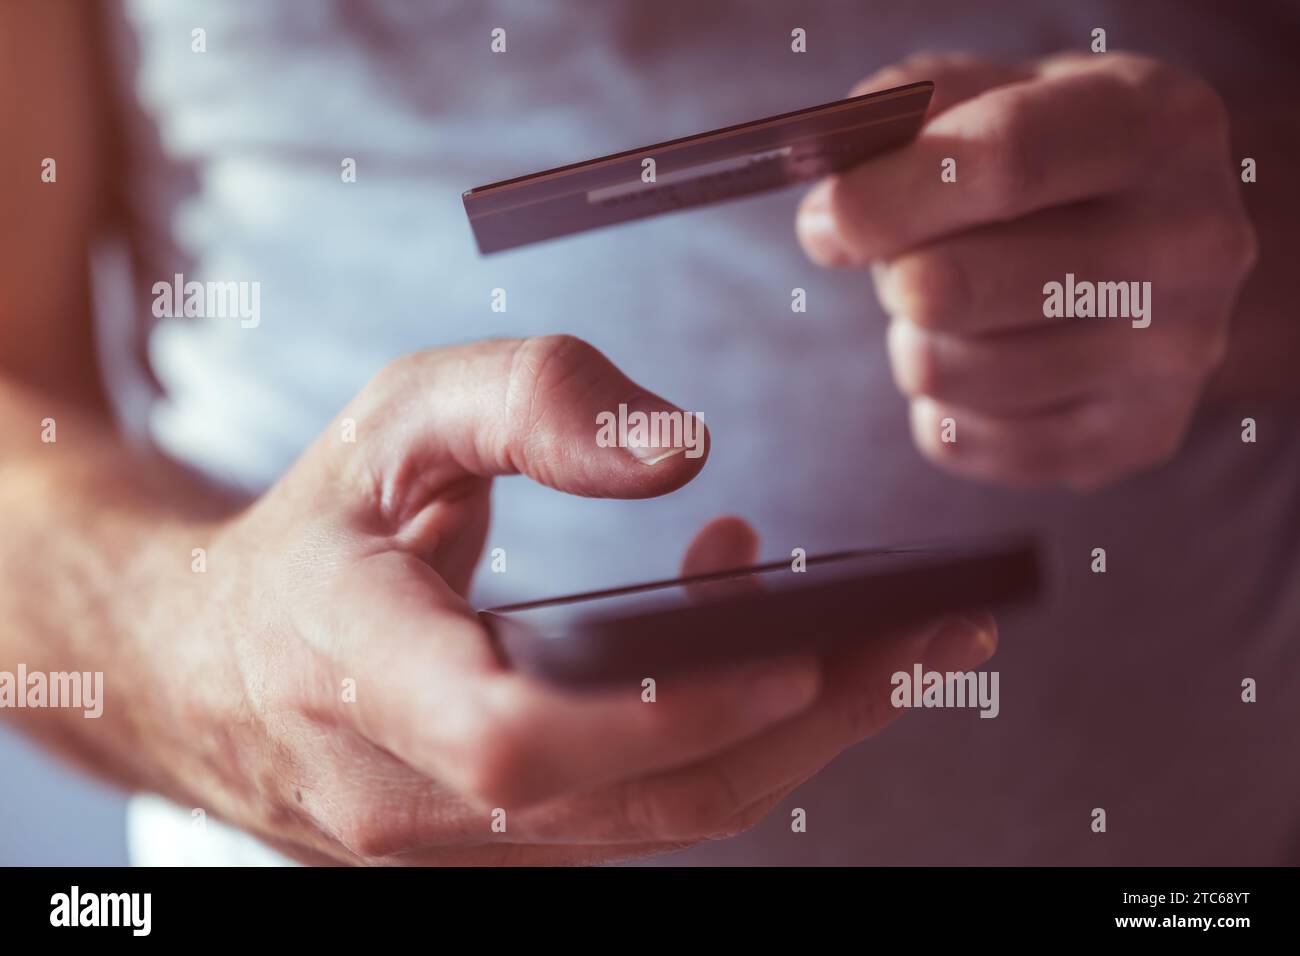 Credit card and mobile phone app online purchase, closeup of male hands using smartphone to complete financial transaction on internet Stock Photo